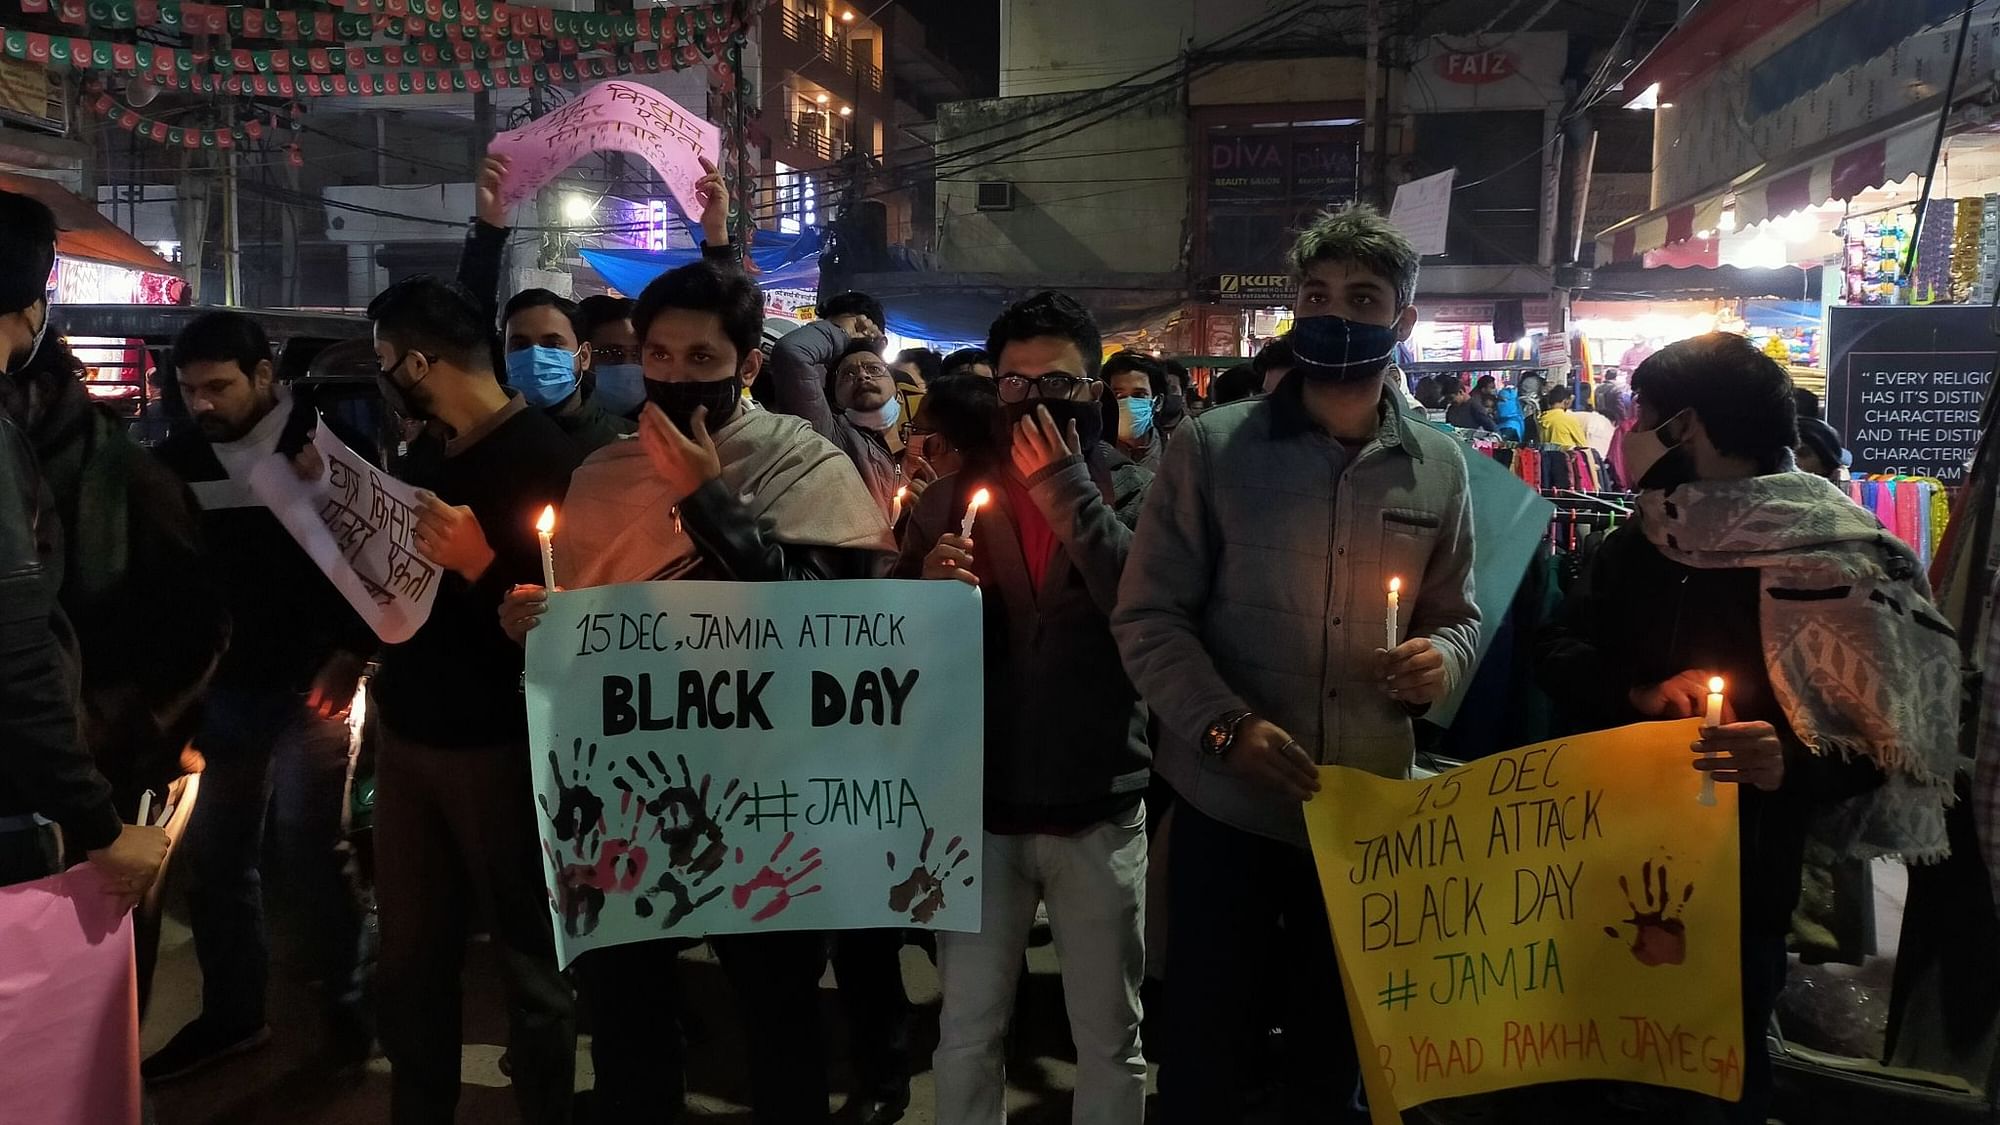 A candle march to mark one year of the violence in Jamia Millia Islamia on 15 Dec, 2020.